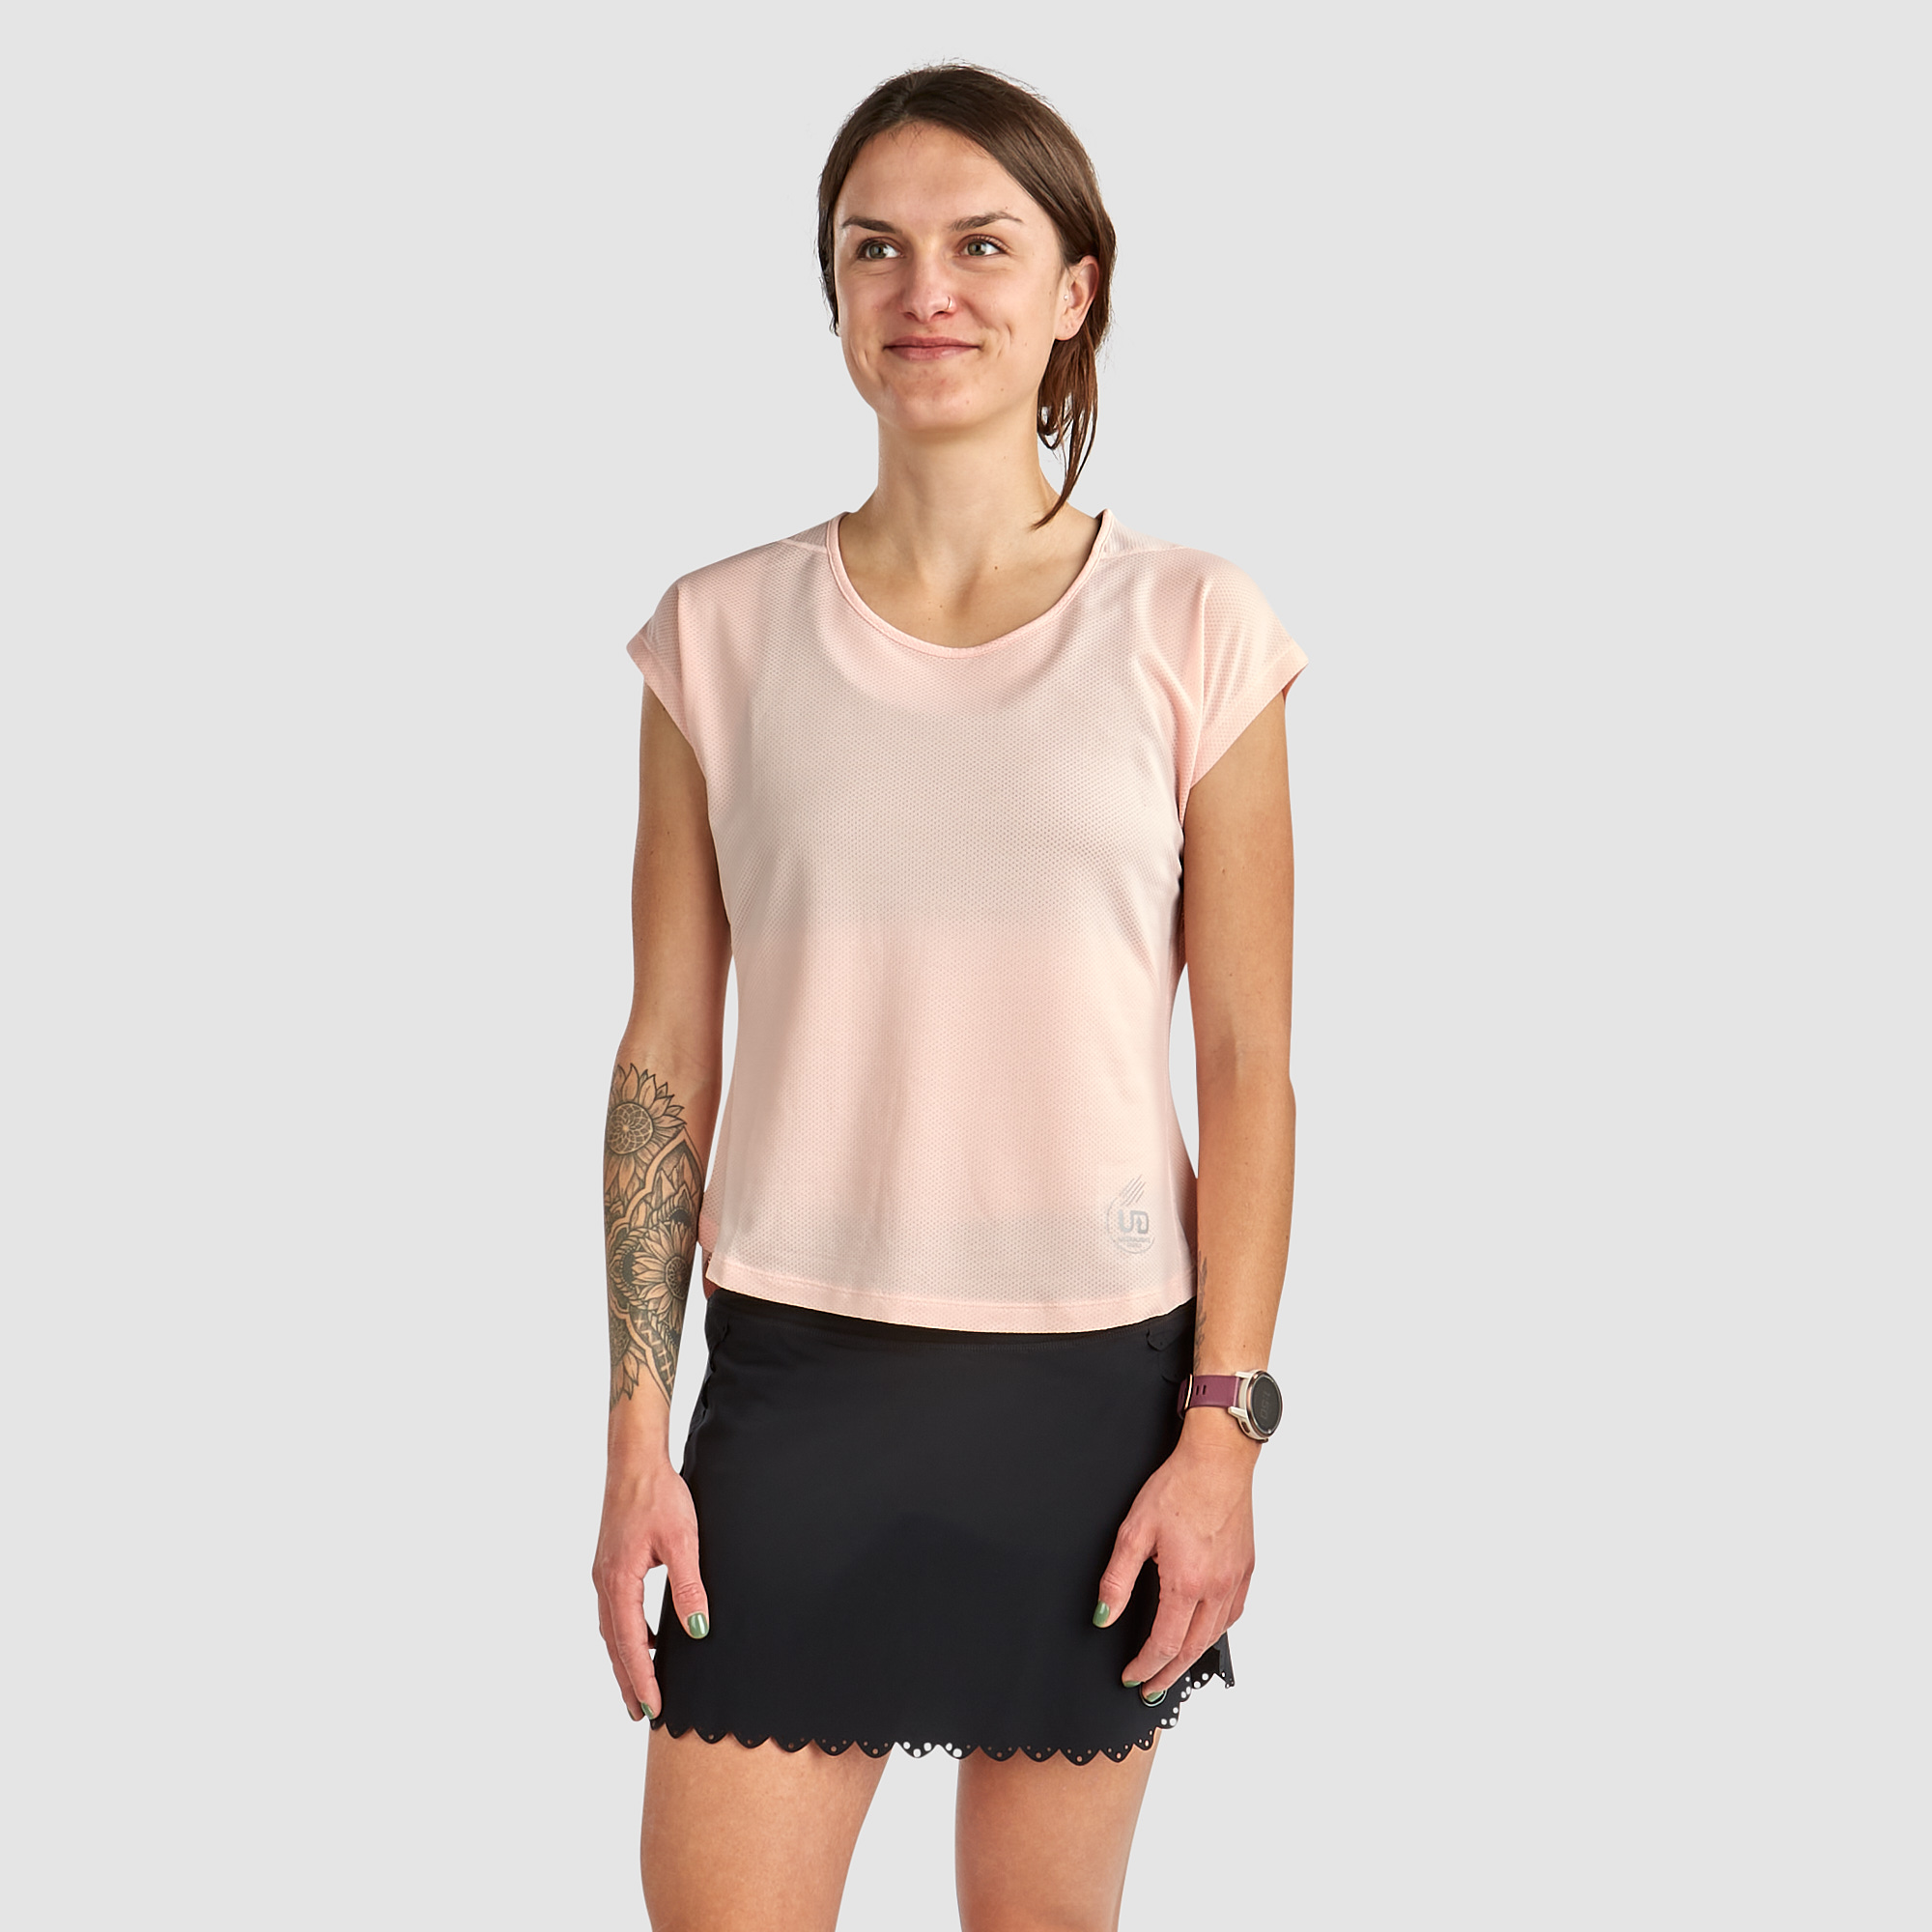 Ultimate Direction Women's Nimbus T-Shirt - Prior Year in Millennial Pink Size XS